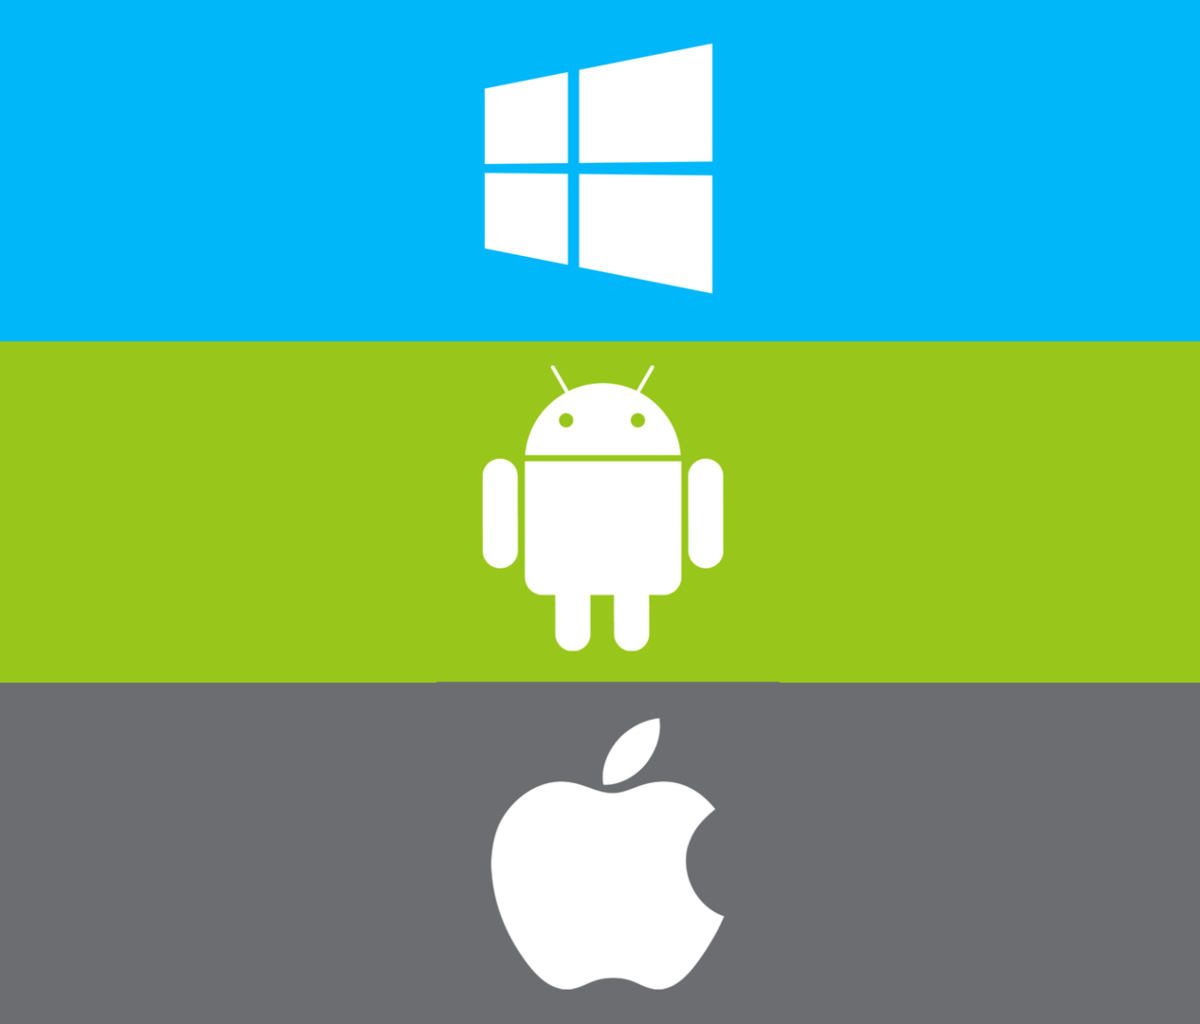 Das Windows, Apple, Android - What's Your Choice? Wallpaper 1200x1024